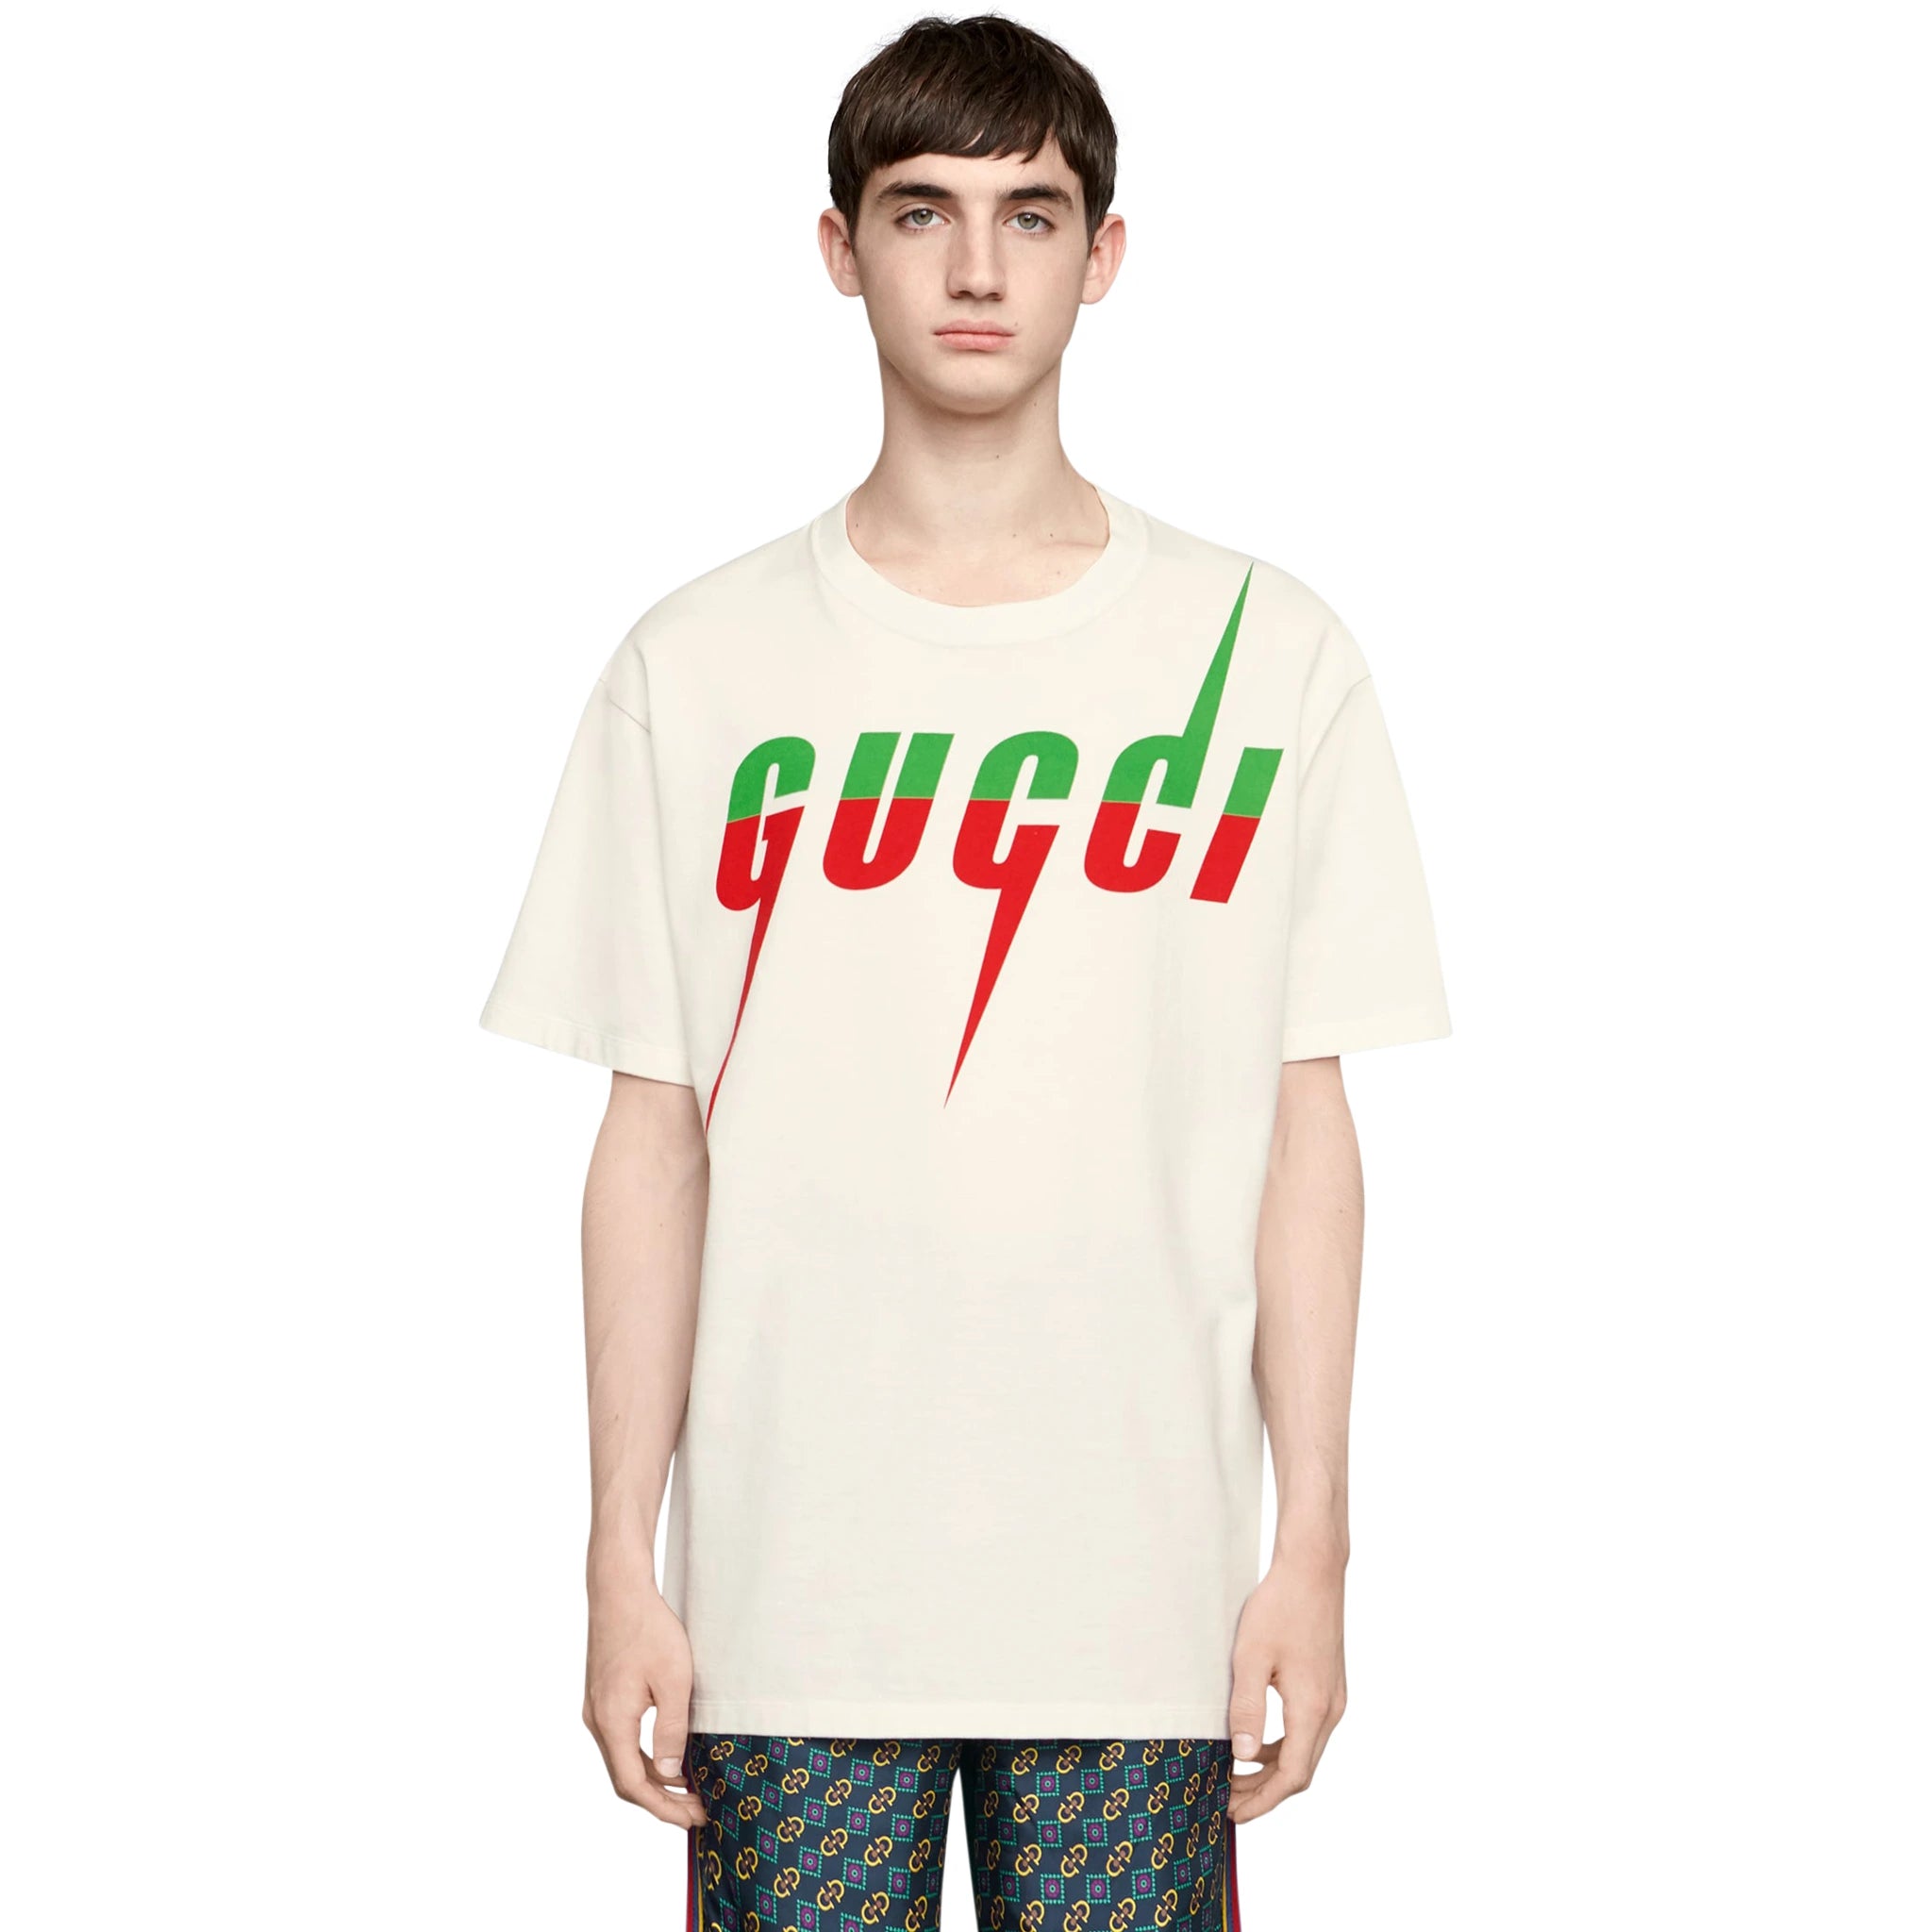 Model front view of Gucci Blade Print White T Shirt 565806 XJAZY 9037